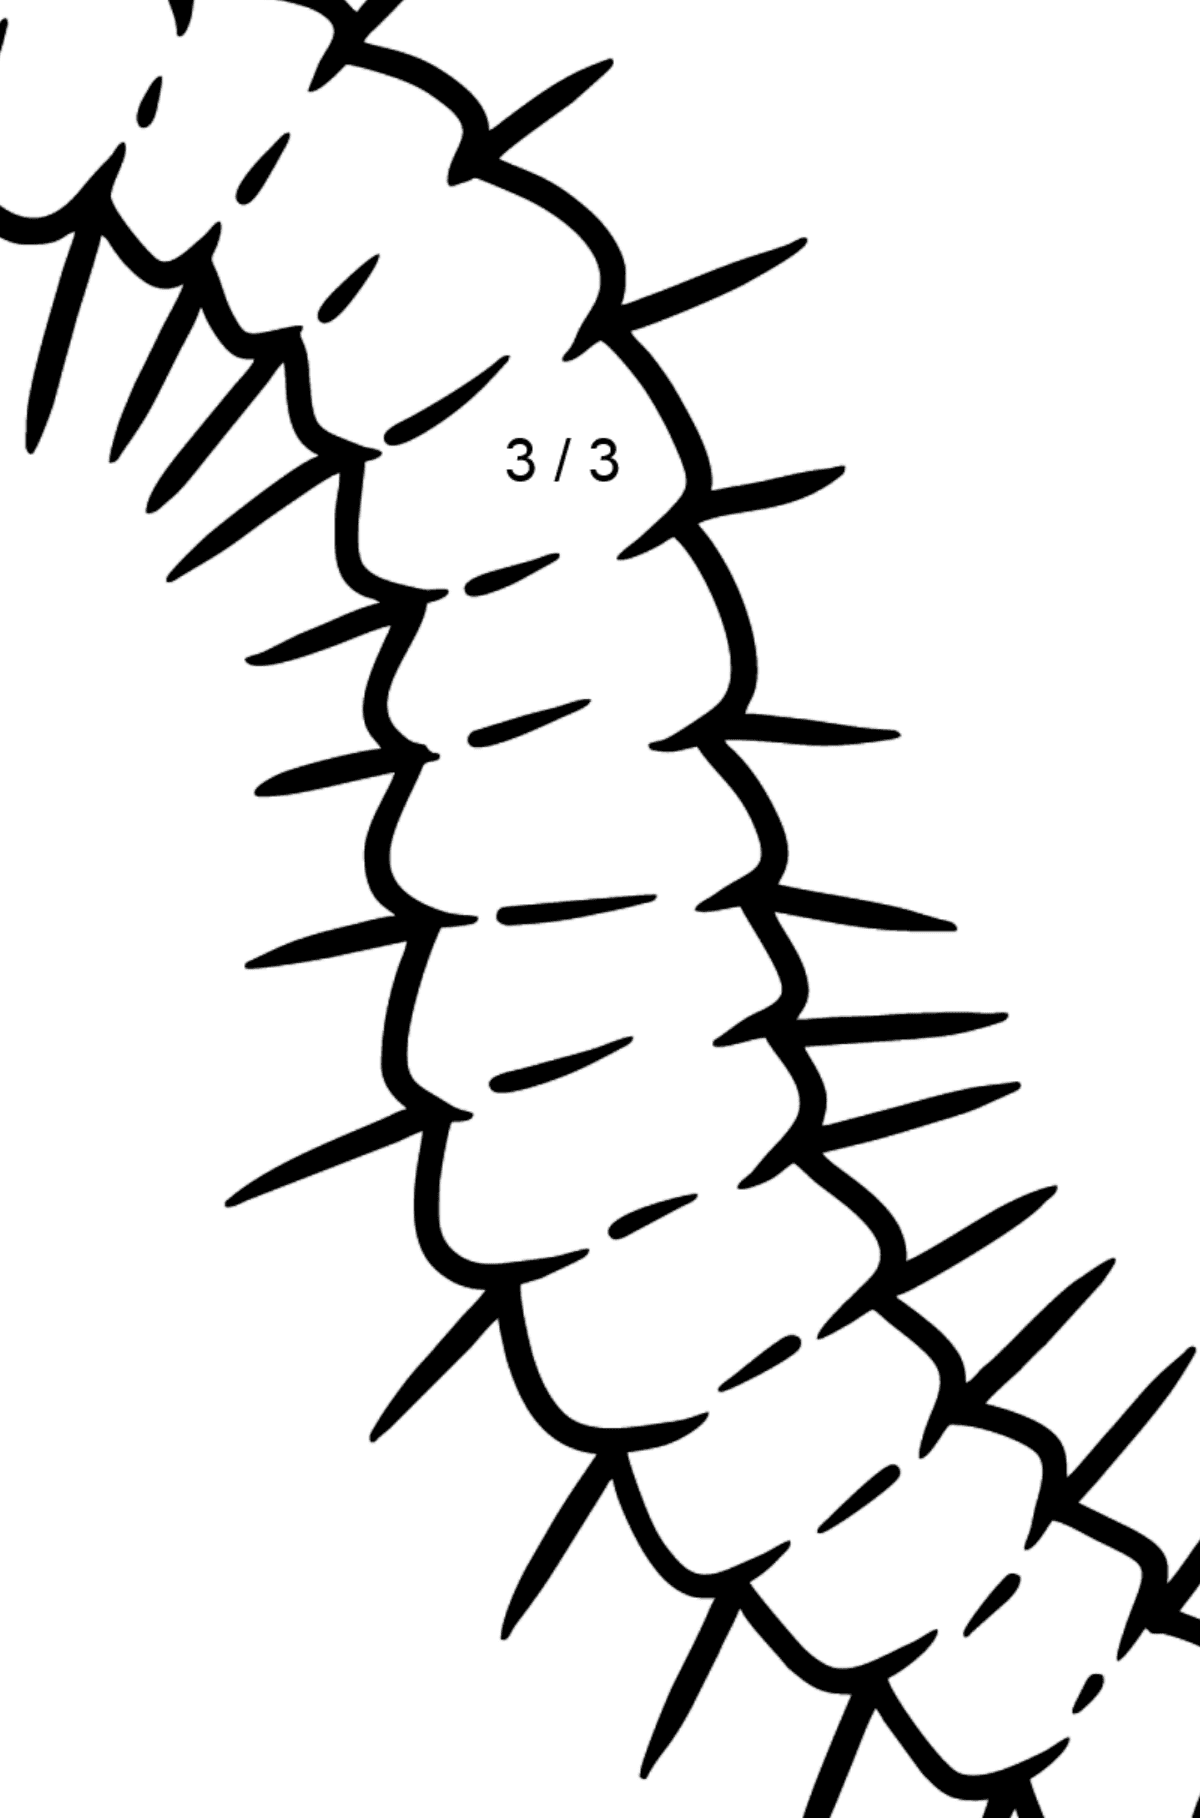 Centipede coloring page - Math Coloring - Division for Kids